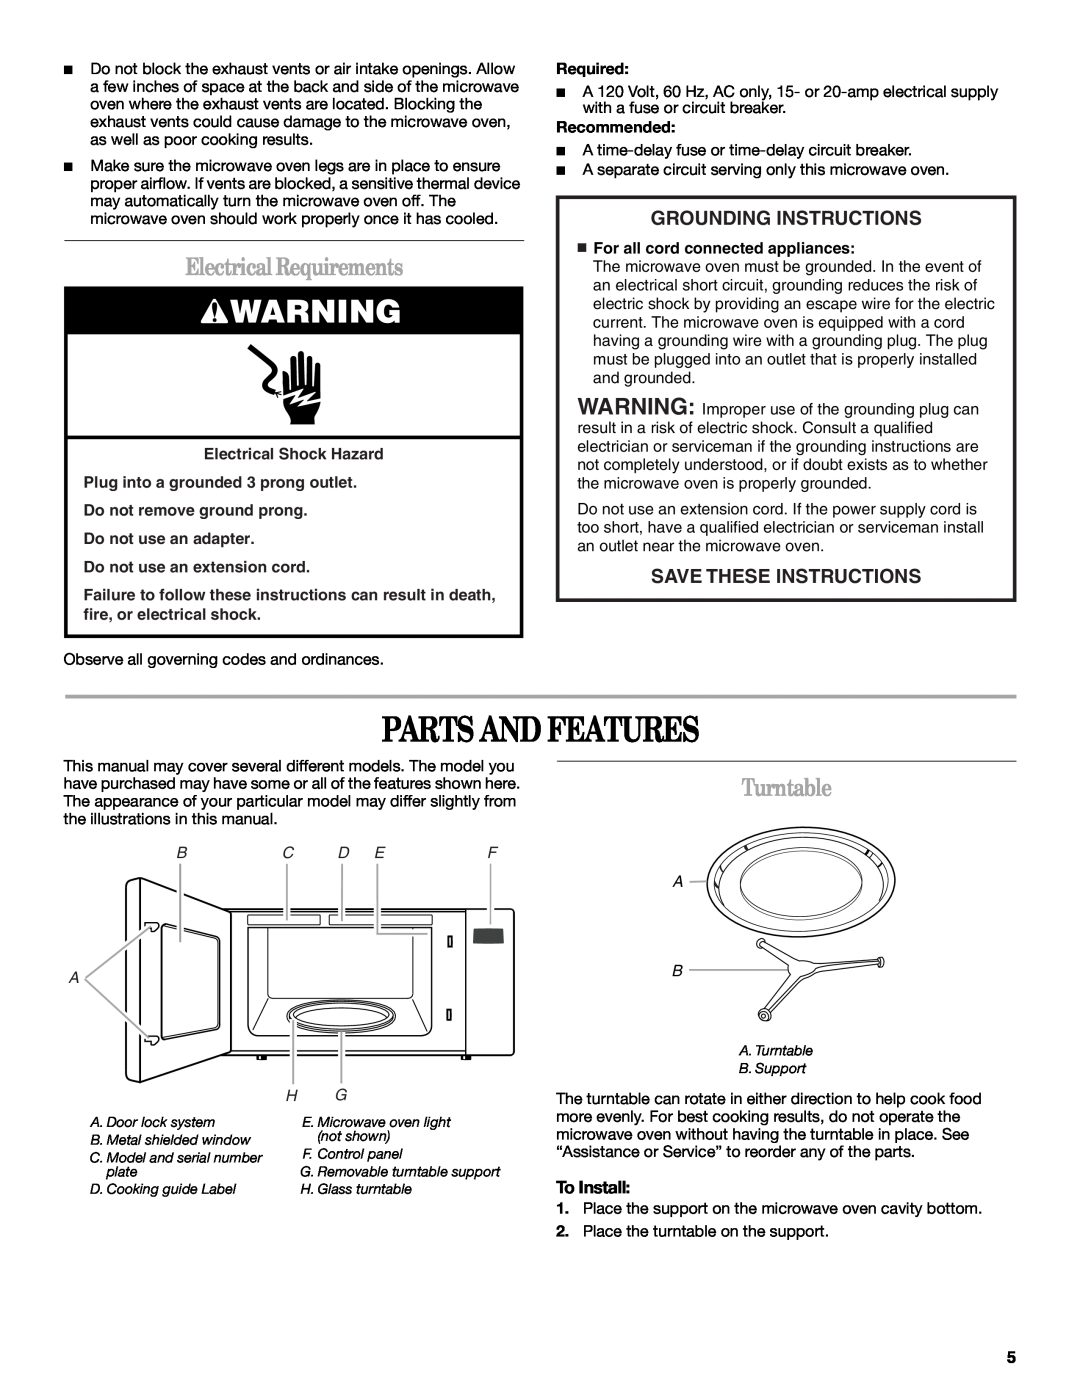 Whirlpool MT4078 Parts And Features, ElectricalRequirements, Turntable, Grounding Instructions, Save These Instructions 